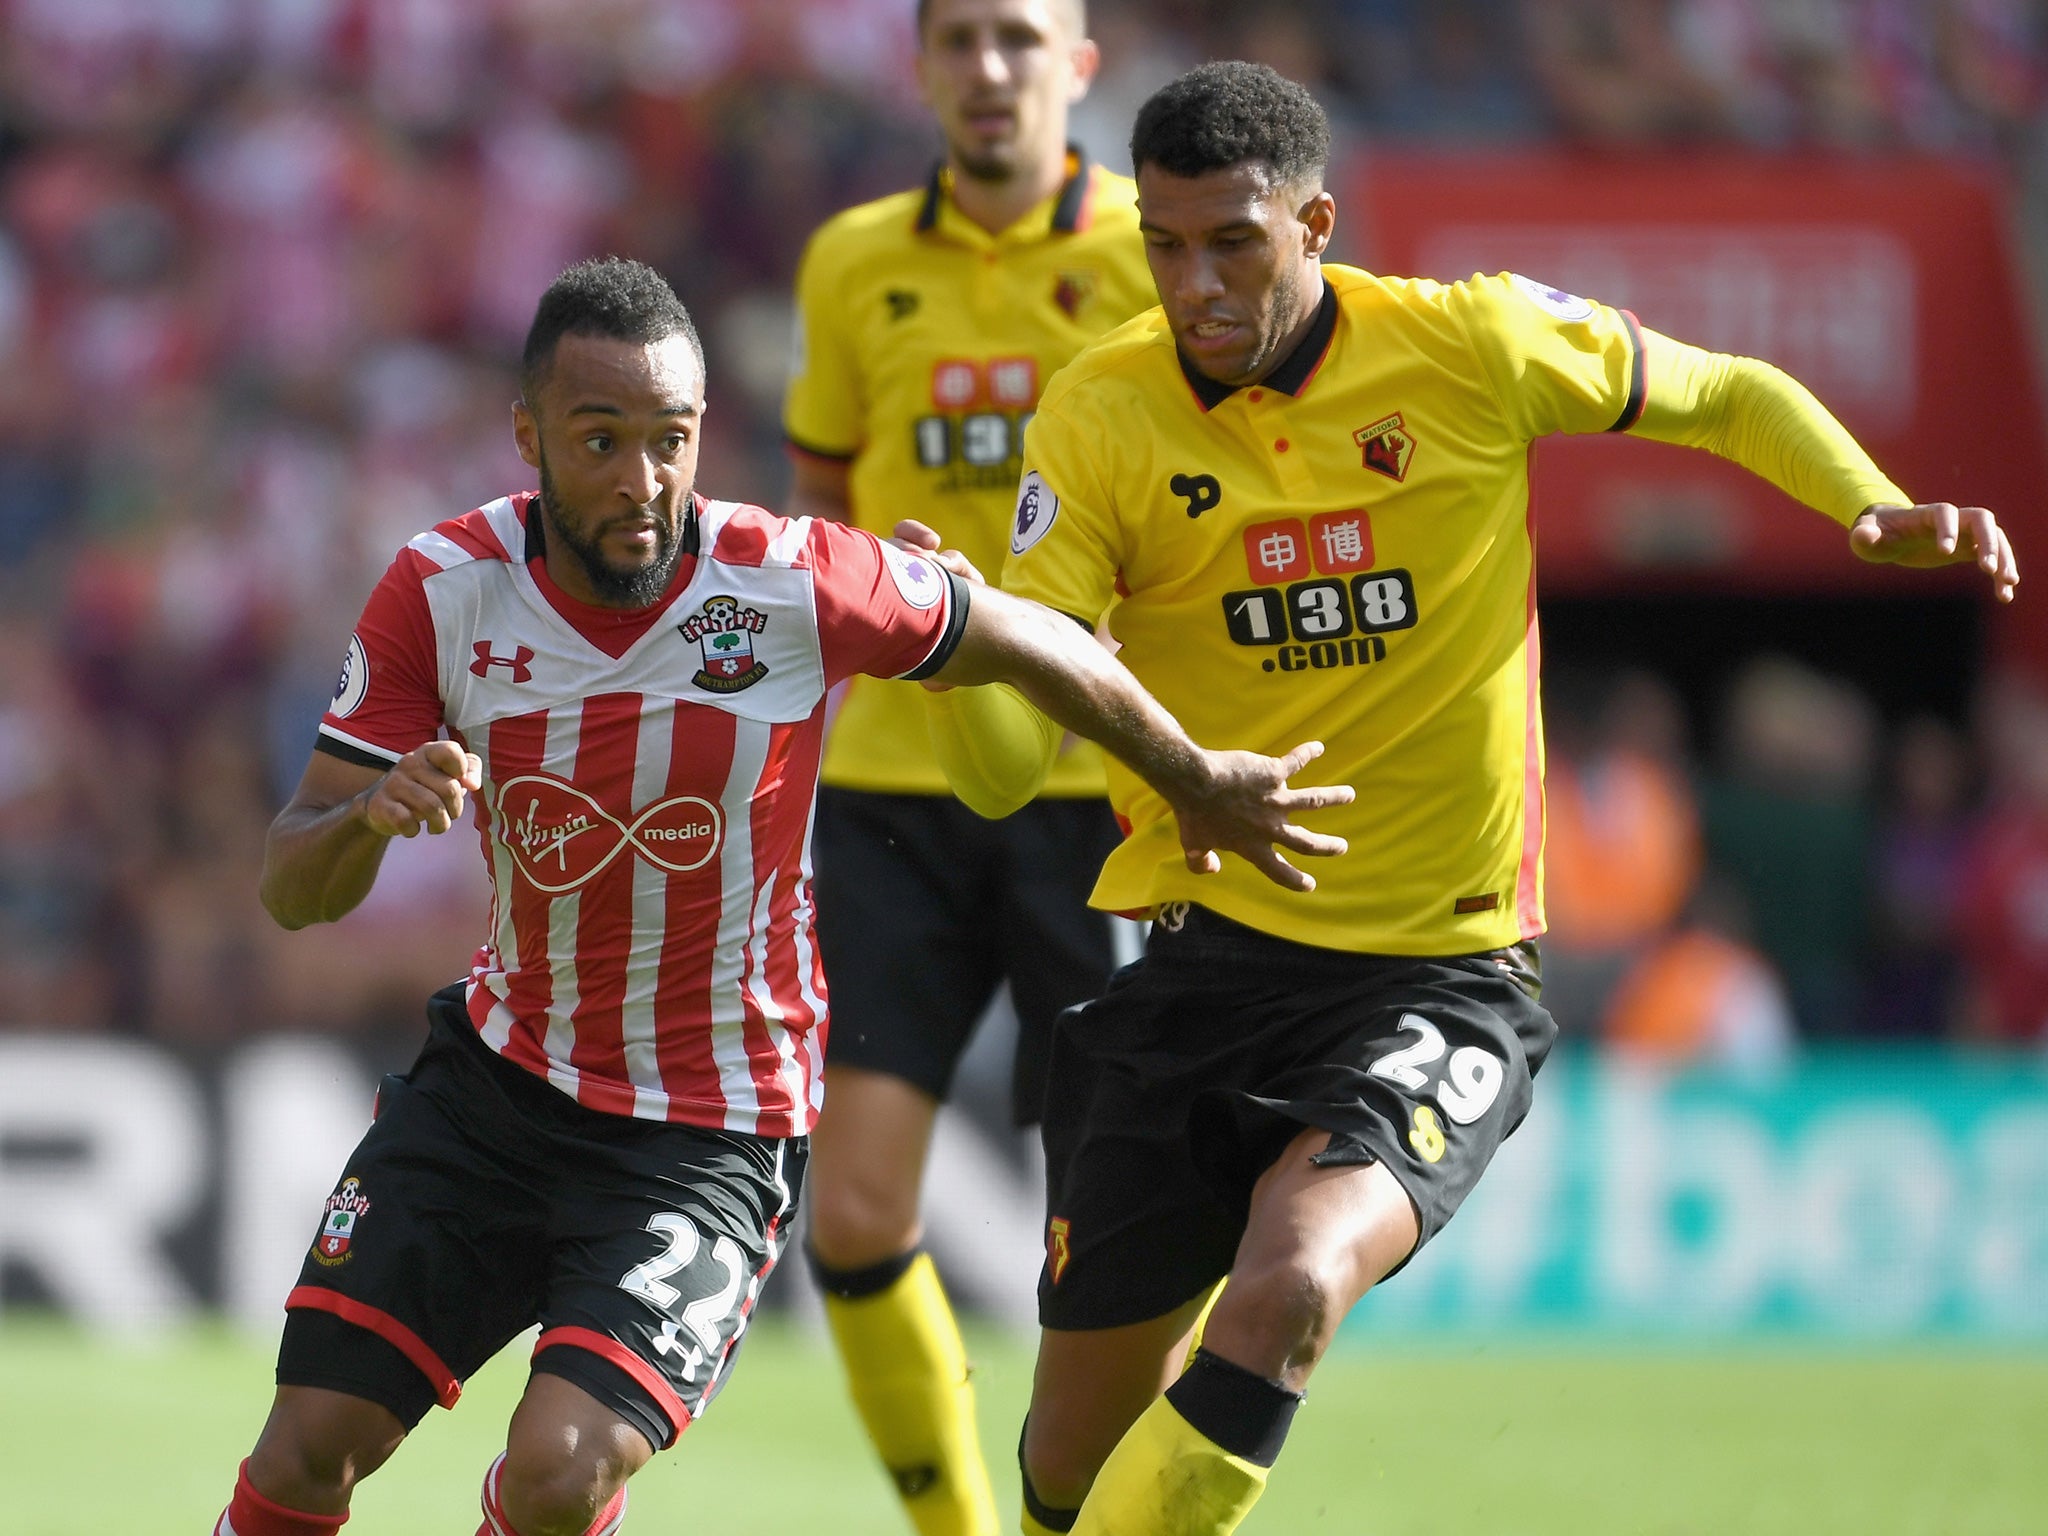 The day's two scorers, Capoue and Redmond, battle for the ball